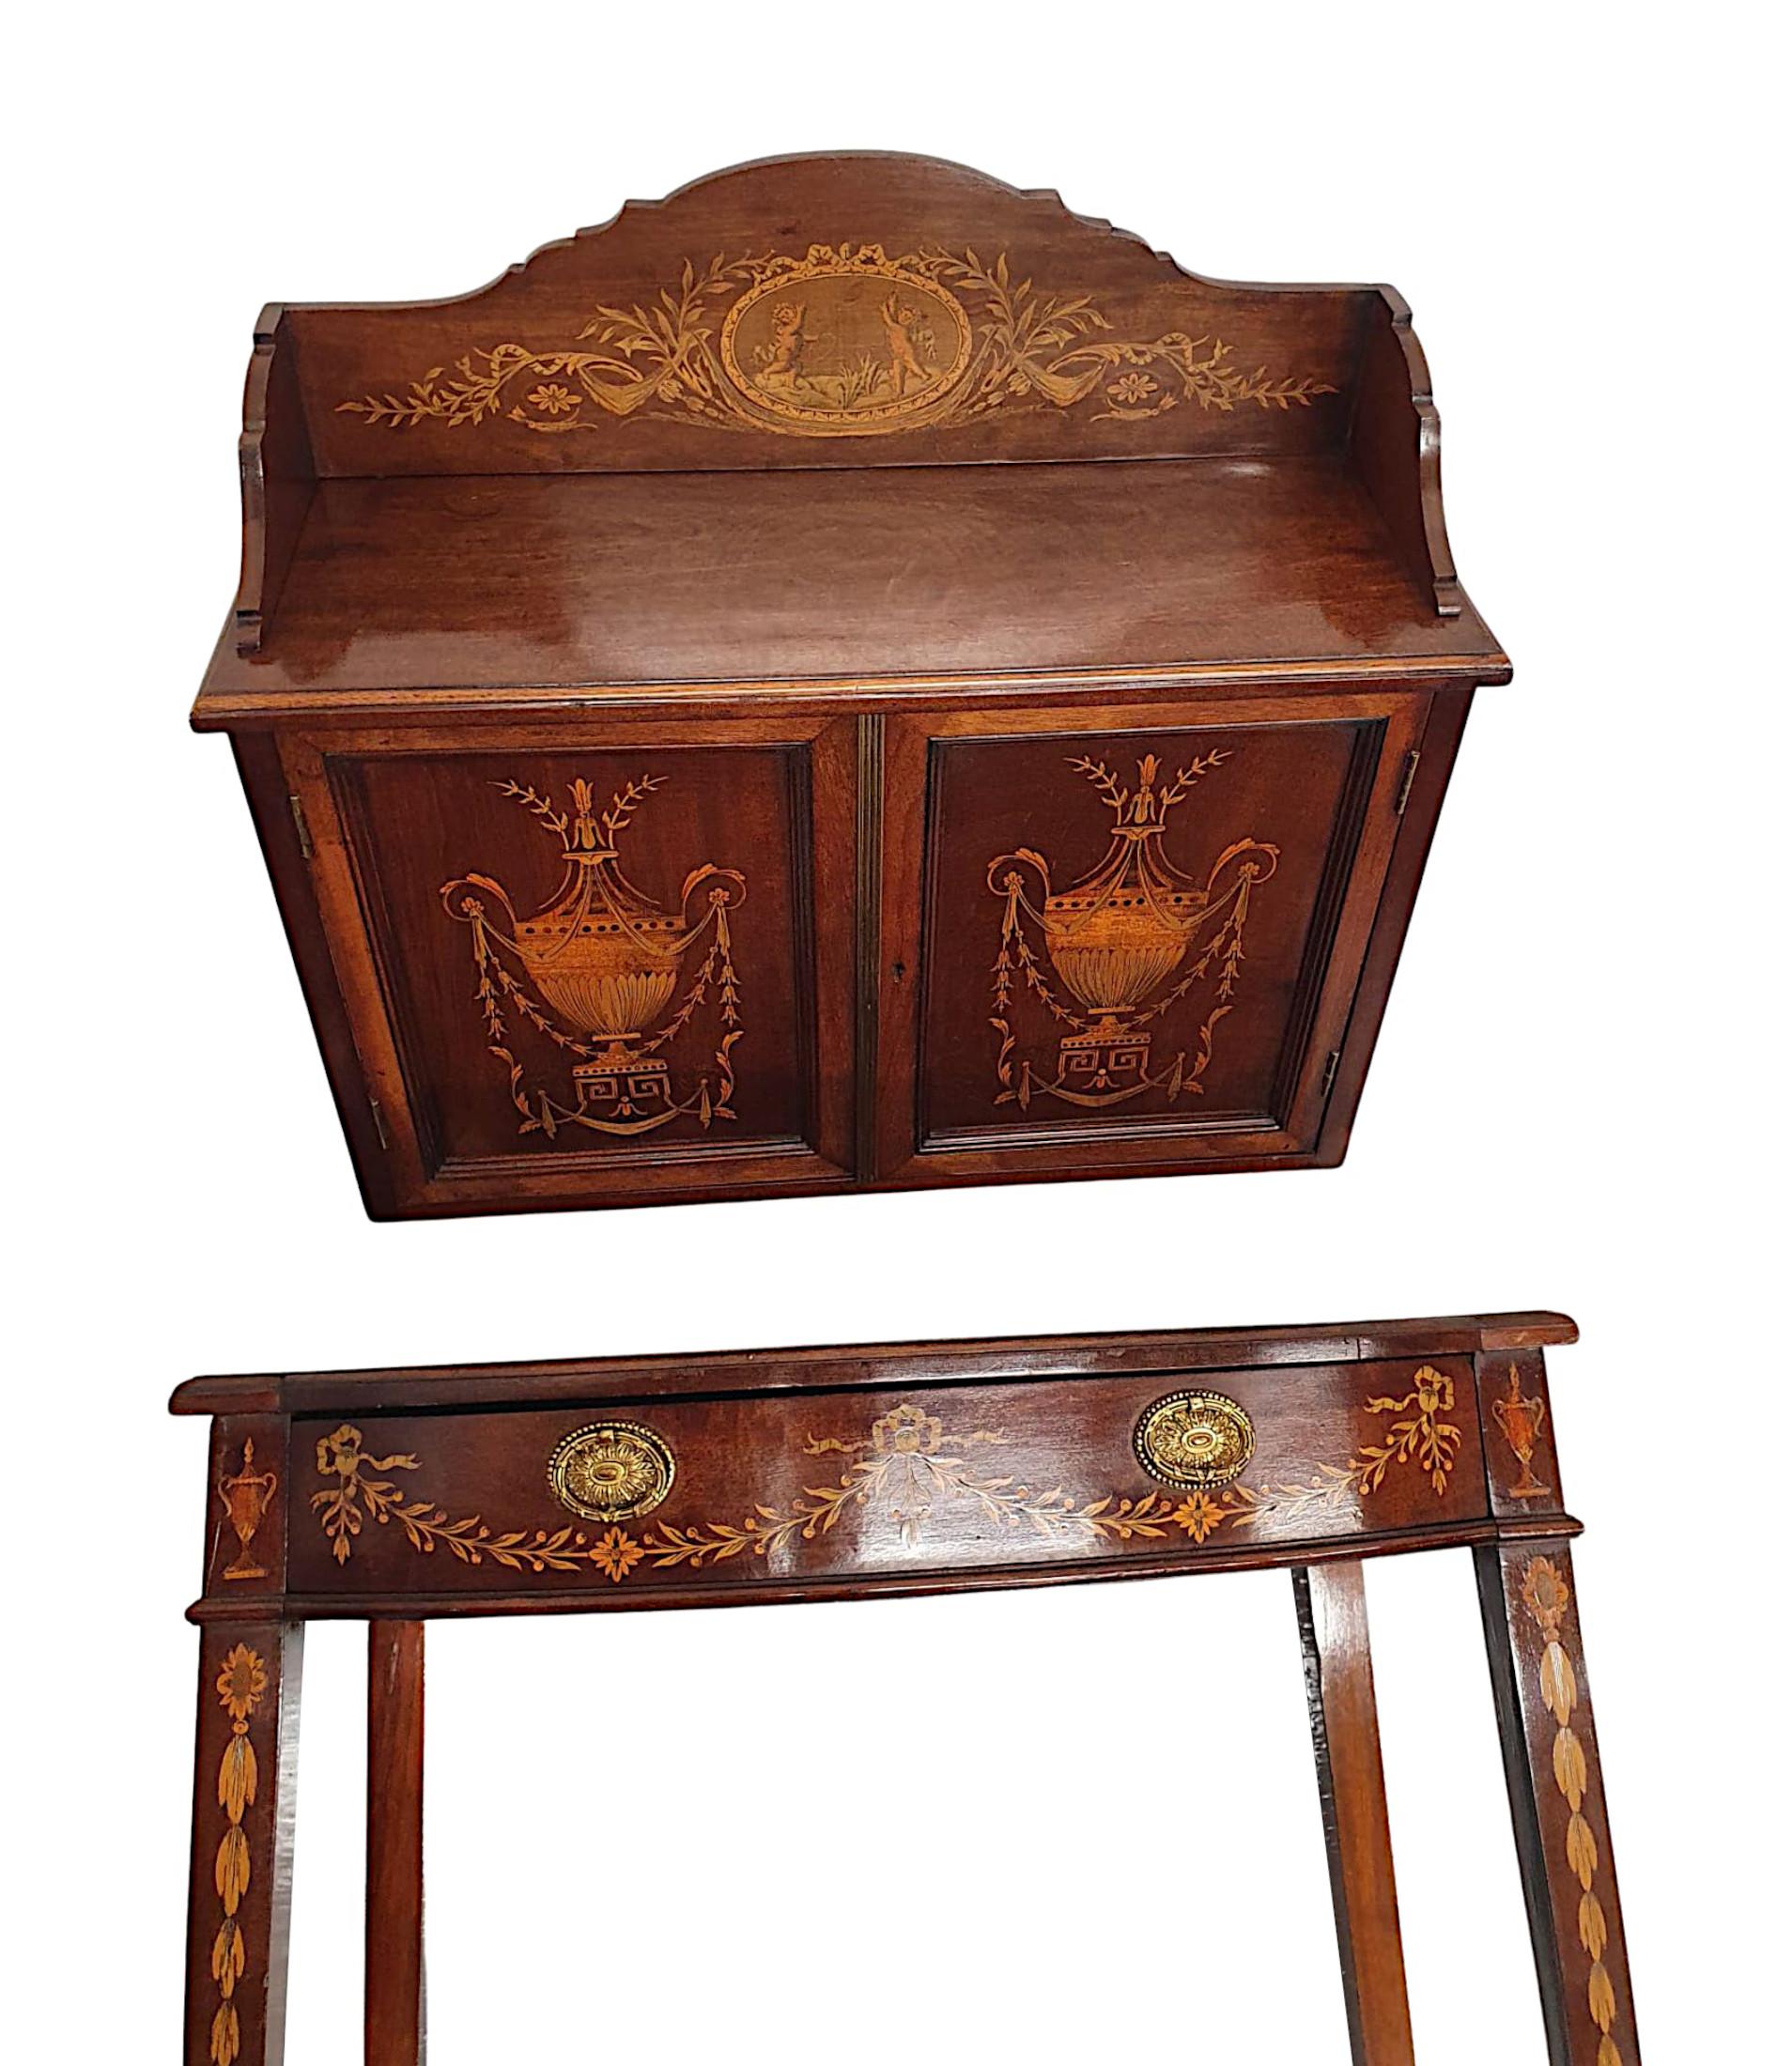  A Rare Pair of Exceptional Edwardian Cabinets Attributed to Edward and Roberts For Sale 7